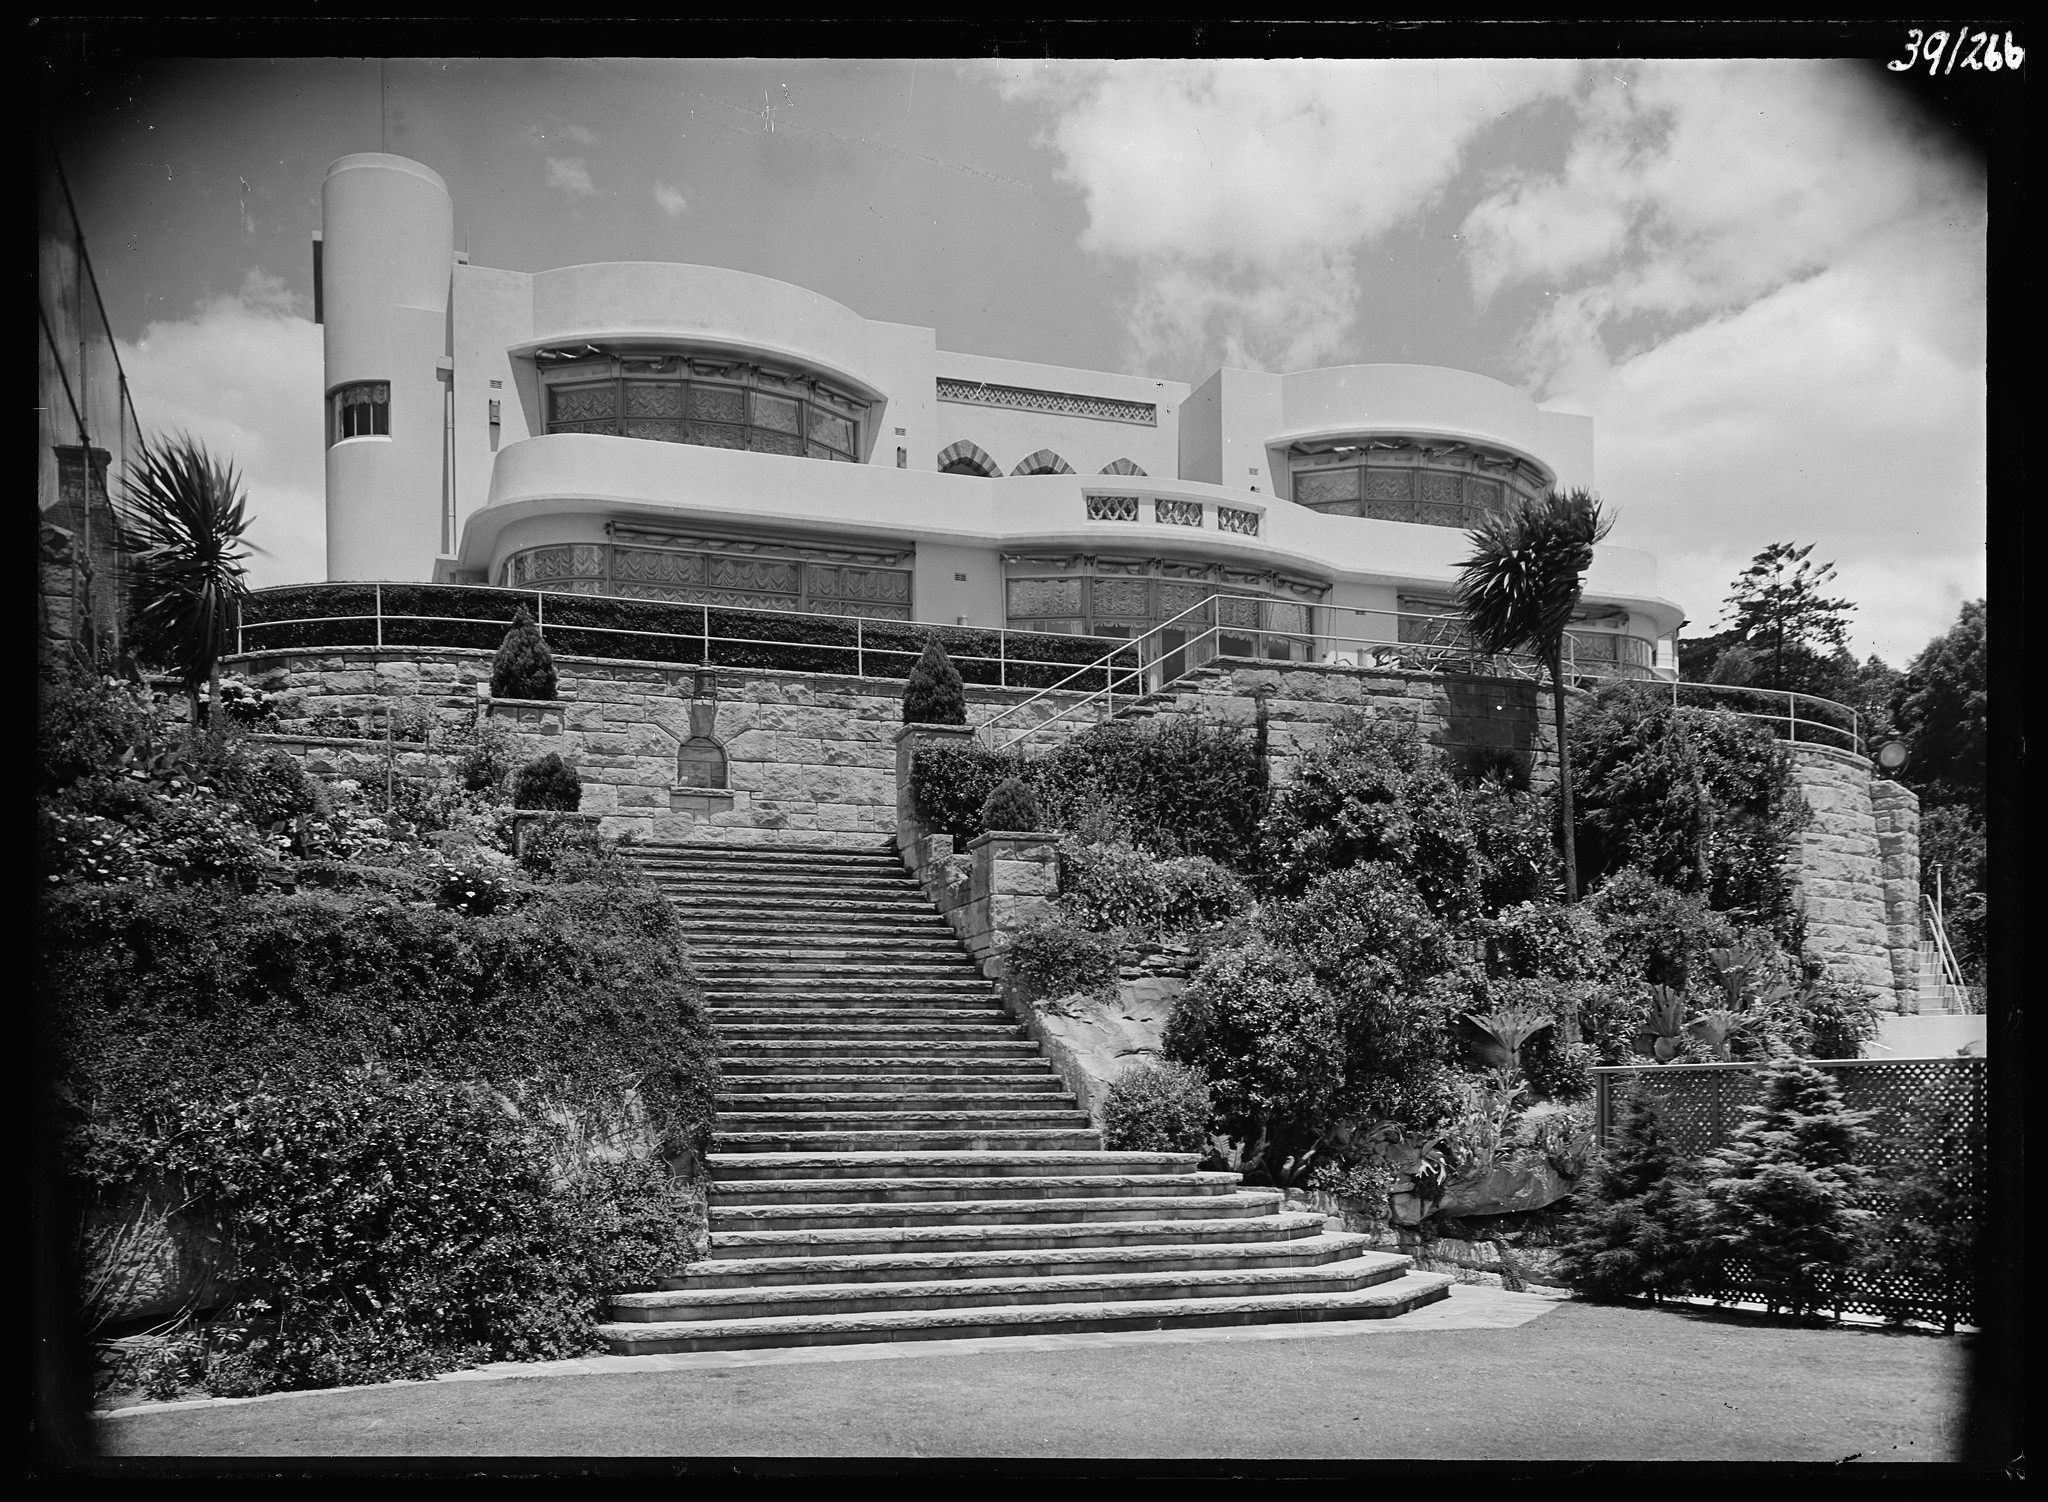 Captain James Patrick's residence, Craigend, Darling Point, Sydney, c. 1936, by Harold Cazneaux, State Library of New South Wales, ON 39-Item 266.jpg